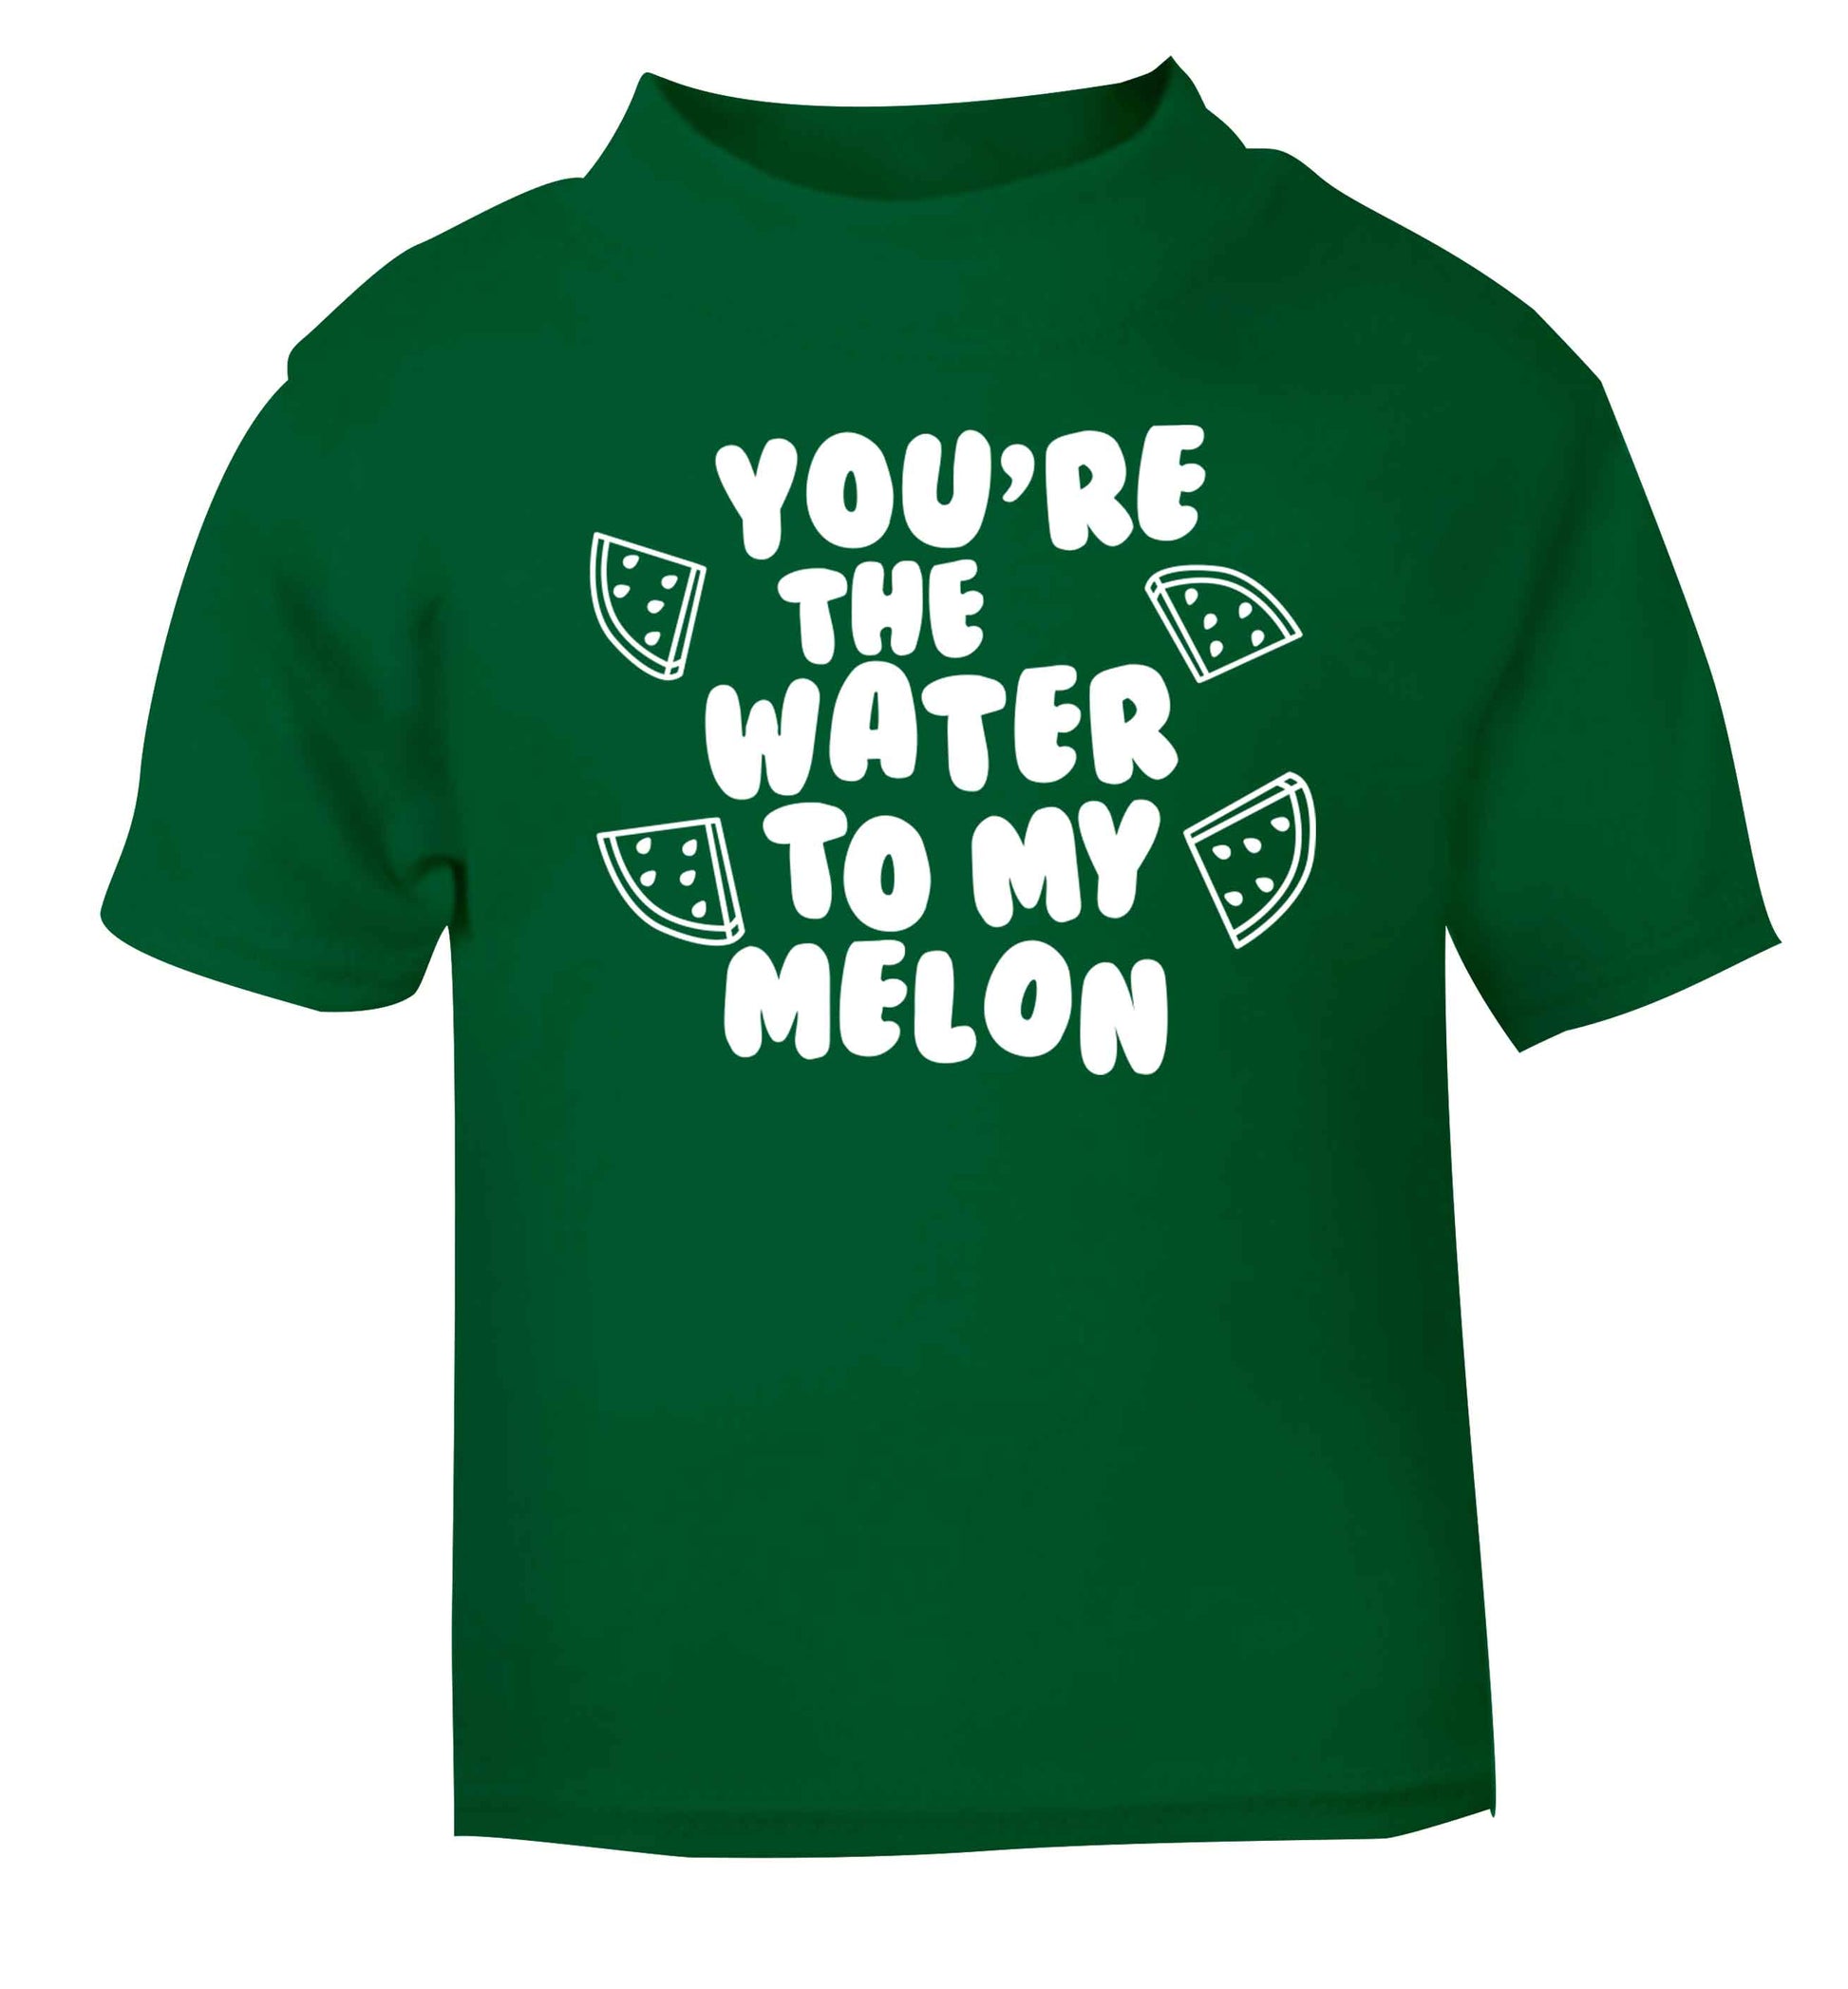 You're the water to my melon green baby toddler Tshirt 2 Years